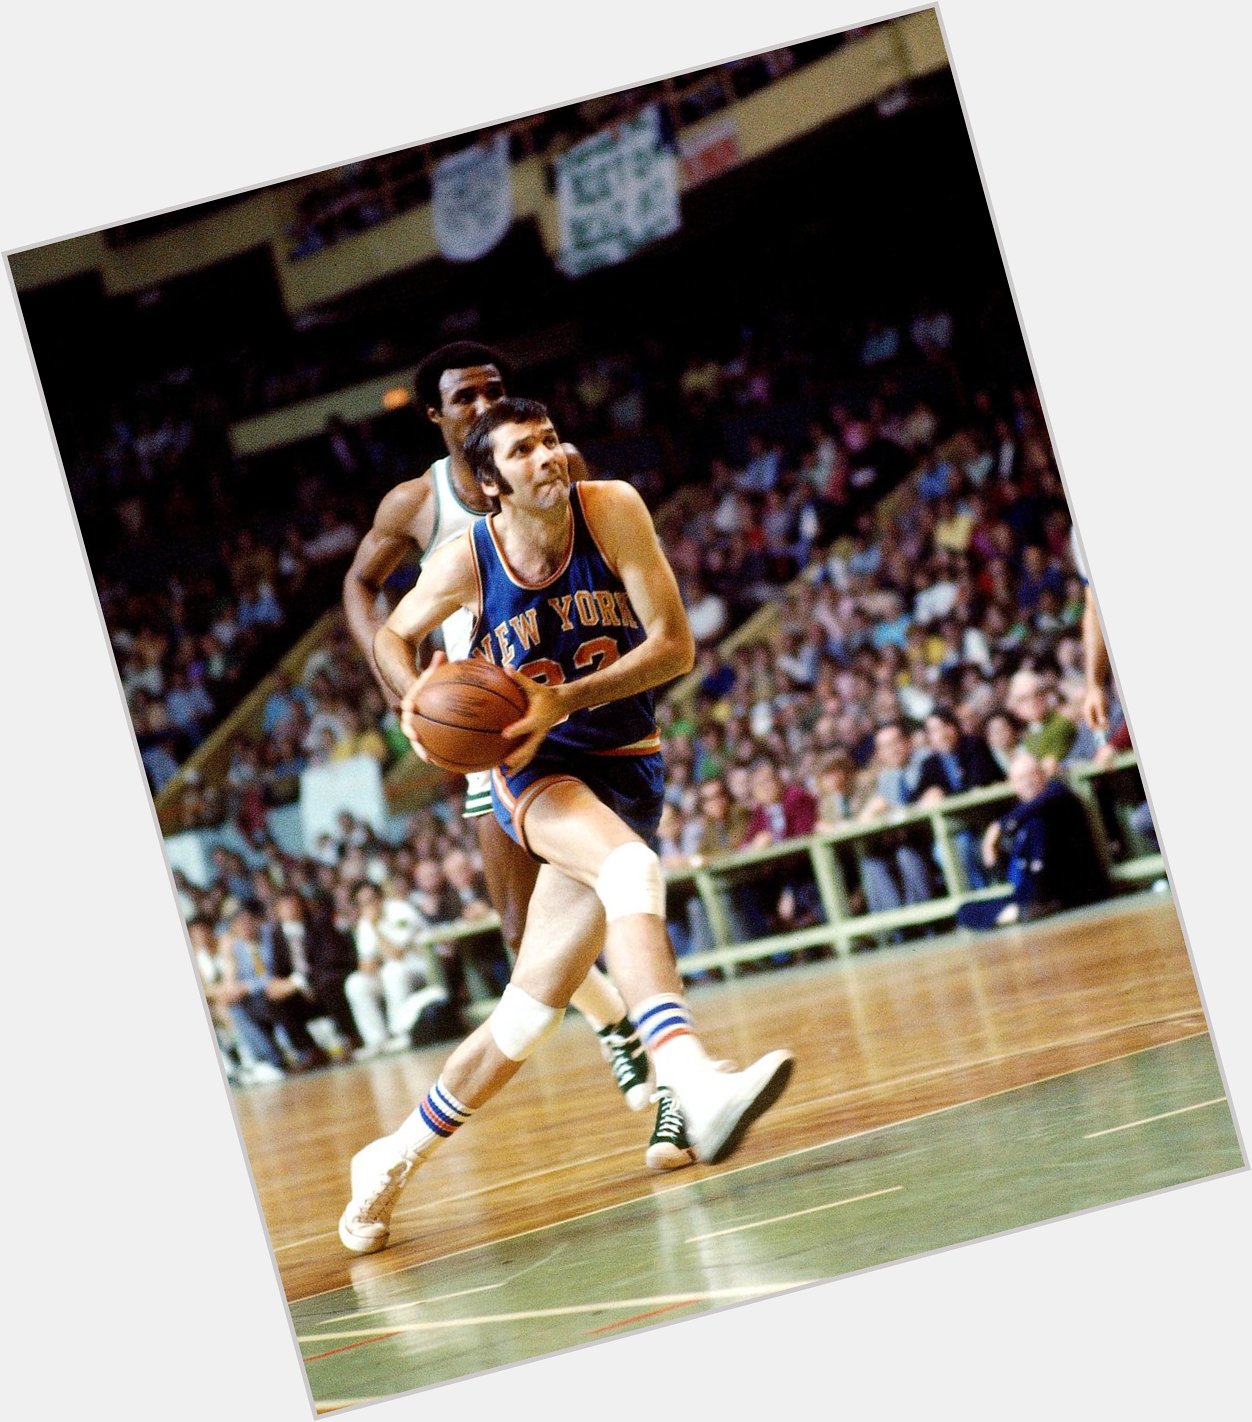 Happy Birthday to Dave DeBusschere, who would have turned 77 today! 